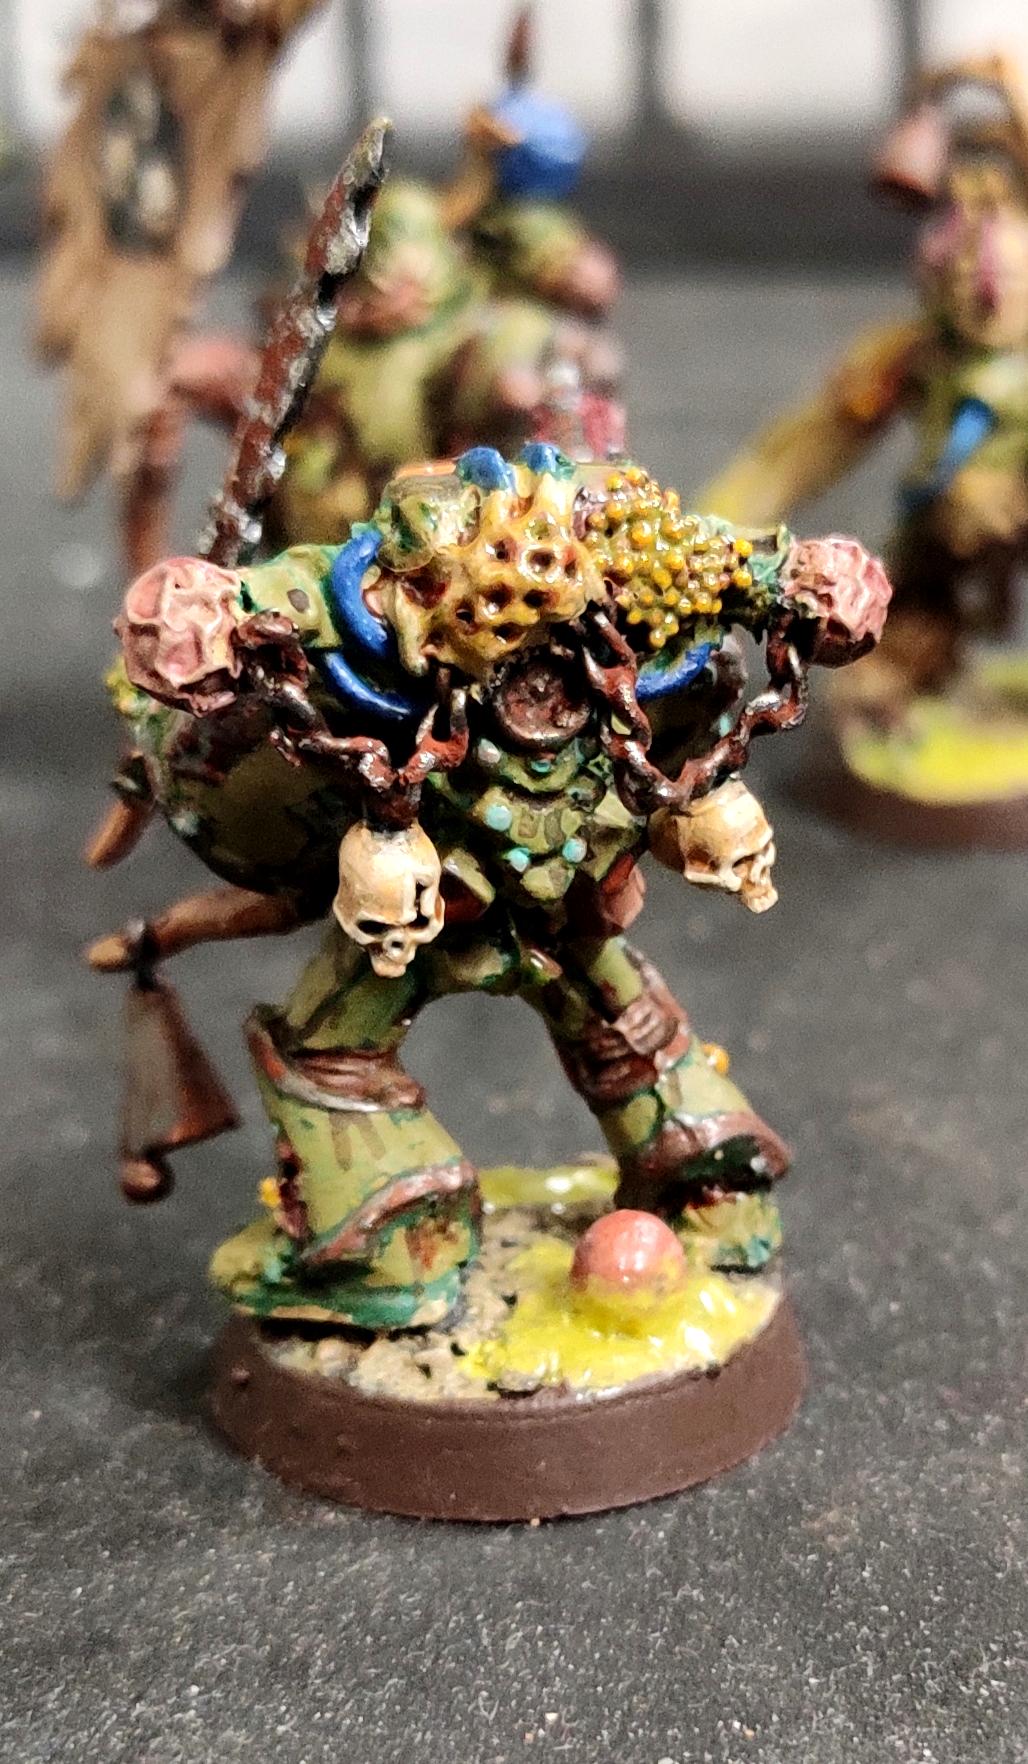 Blight, Chaos, Chaos Space Marines, Conversion, Death Guard, Decay, Disease, Heresy, Heretic Astartes, Infantry, Nurgle, Pestilence, Plague, Plague Marines, Regiment, Rot, Rust, Sculpting, Traitor Legions, Warhammer 40,000